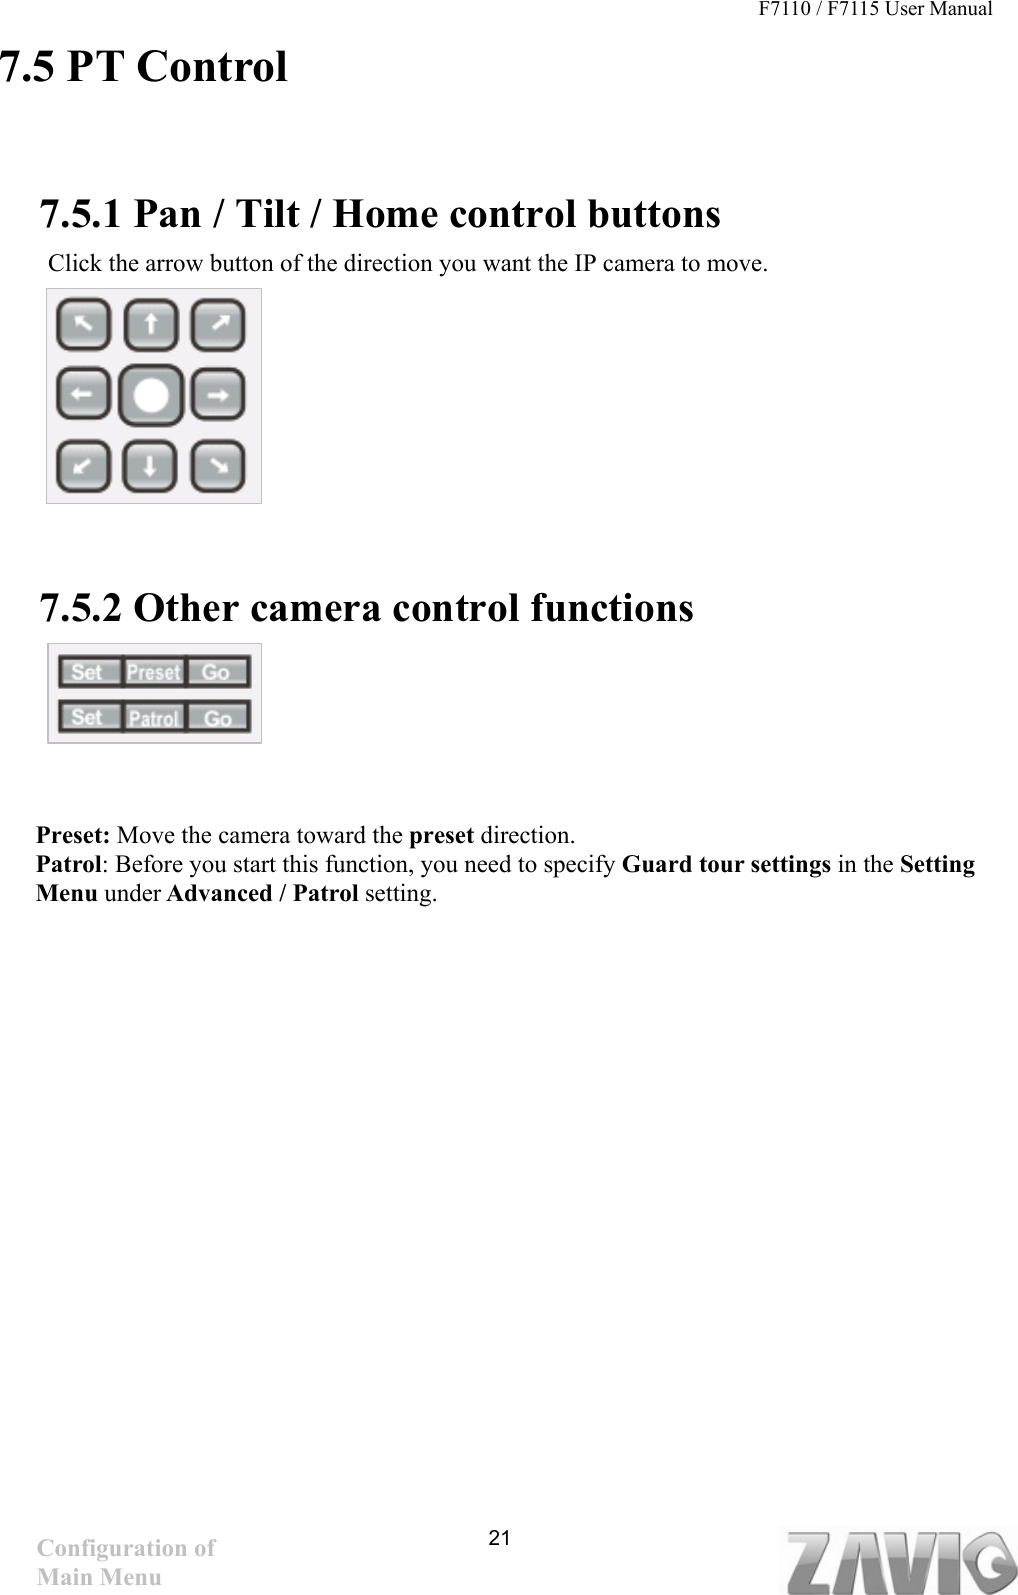 F7110 / F7115 User Manual   7.5 PT Control      7.5.1 Pan / Tilt / Home control buttons Click the arrow button of the direction you want the IP camera to move.        7.5.2 Other camera control functions     Preset: Move the camera toward the preset direction. Patrol: Before you start this function, you need to specify Guard tour settings in the Setting Menu under Advanced / Patrol setting.  21Configuration of Main Menu 